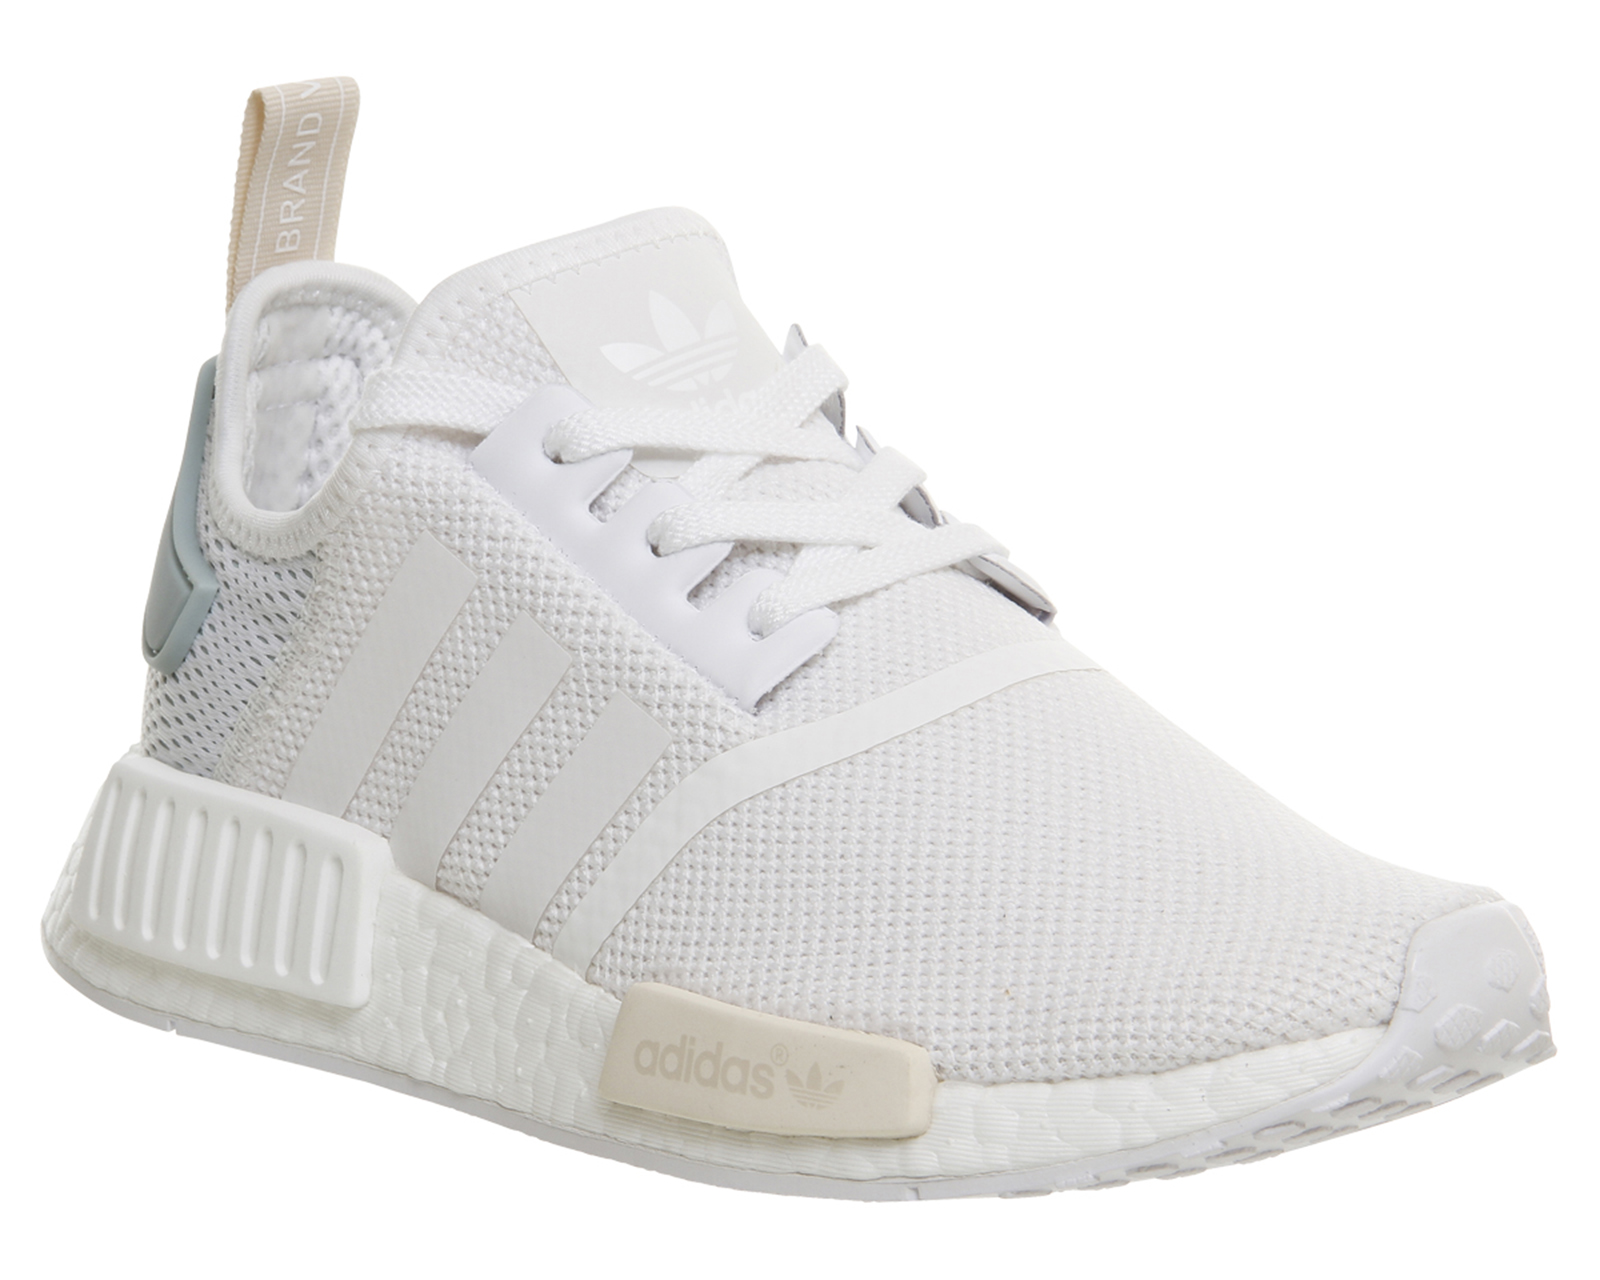 womens nmd r1 tactile green